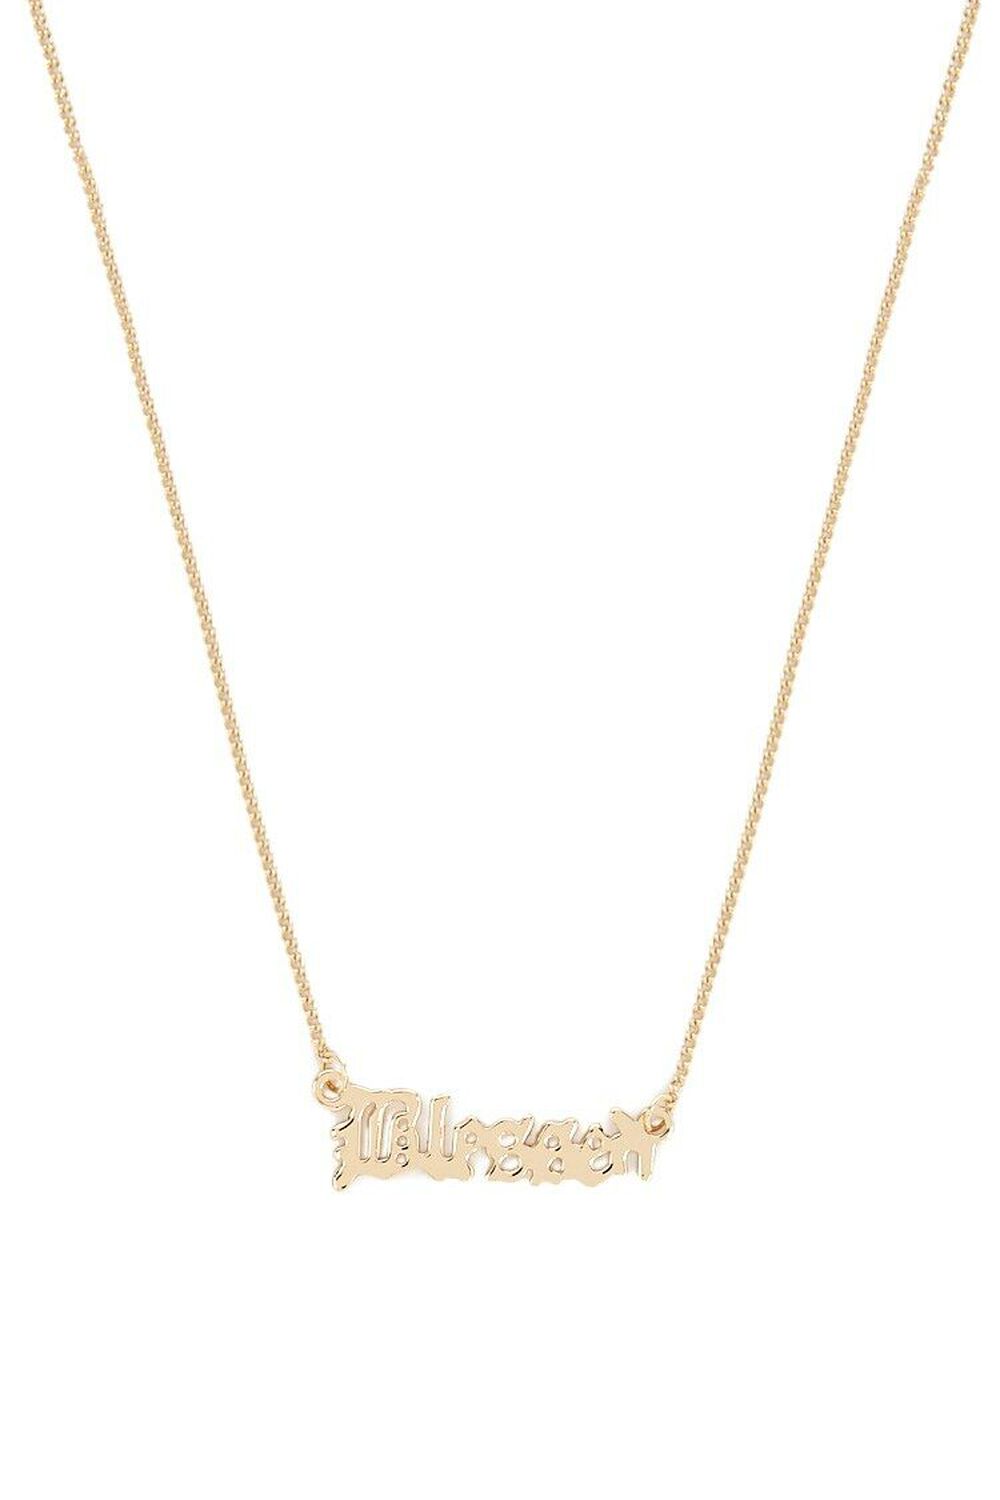 GOLD Blessed Pendant Chain Necklace, image 1